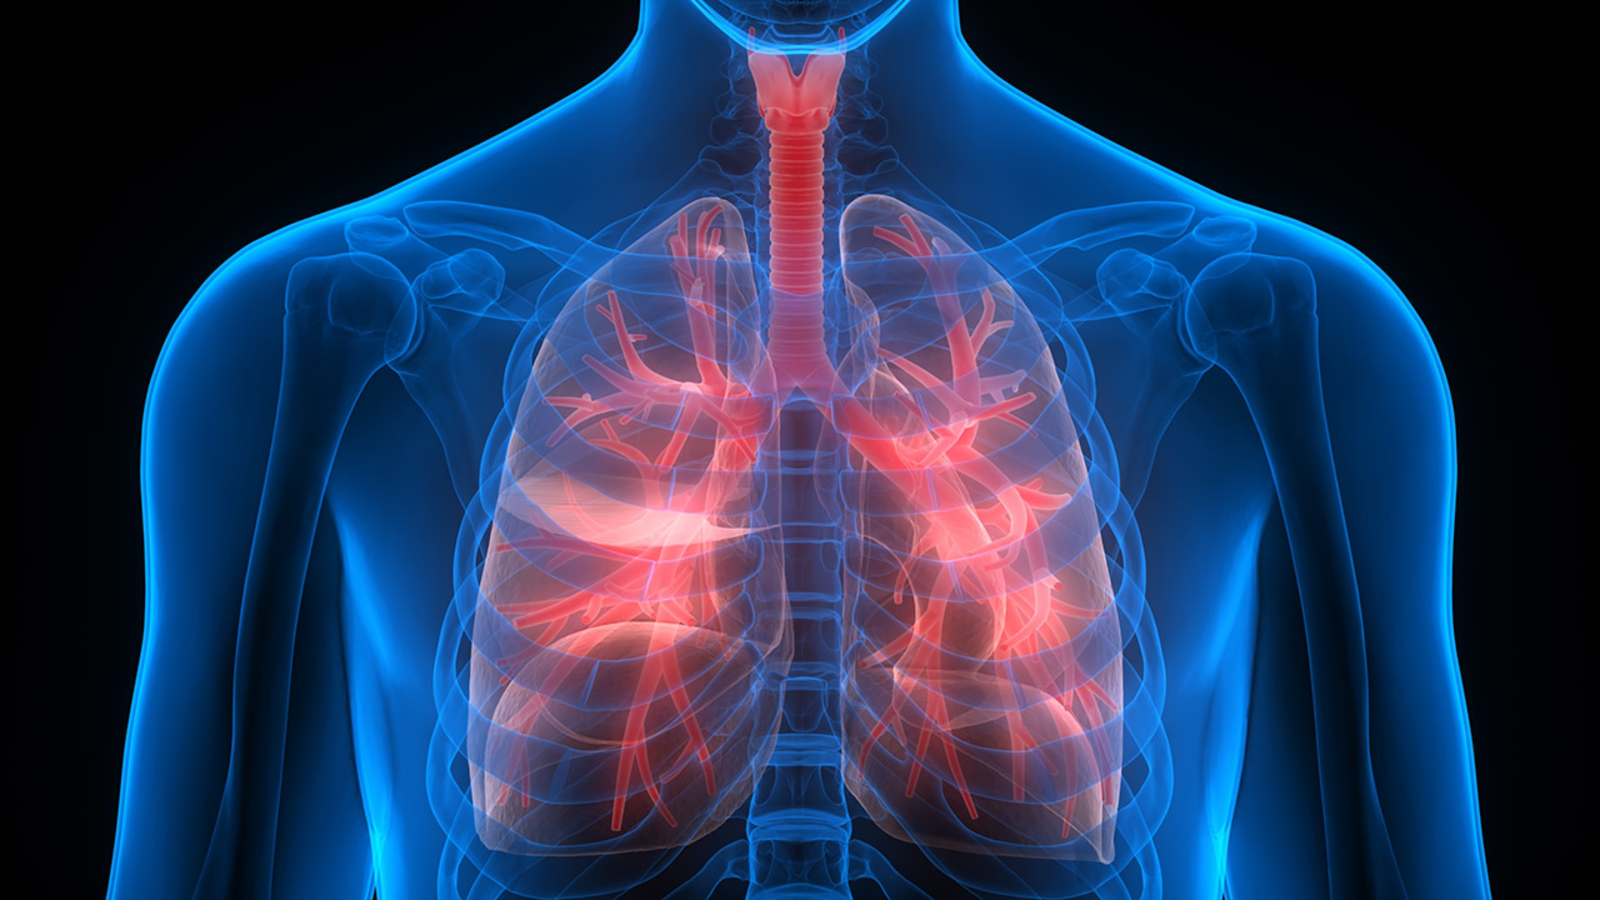 3347070_041518-cc-ss-copd-lungs-img